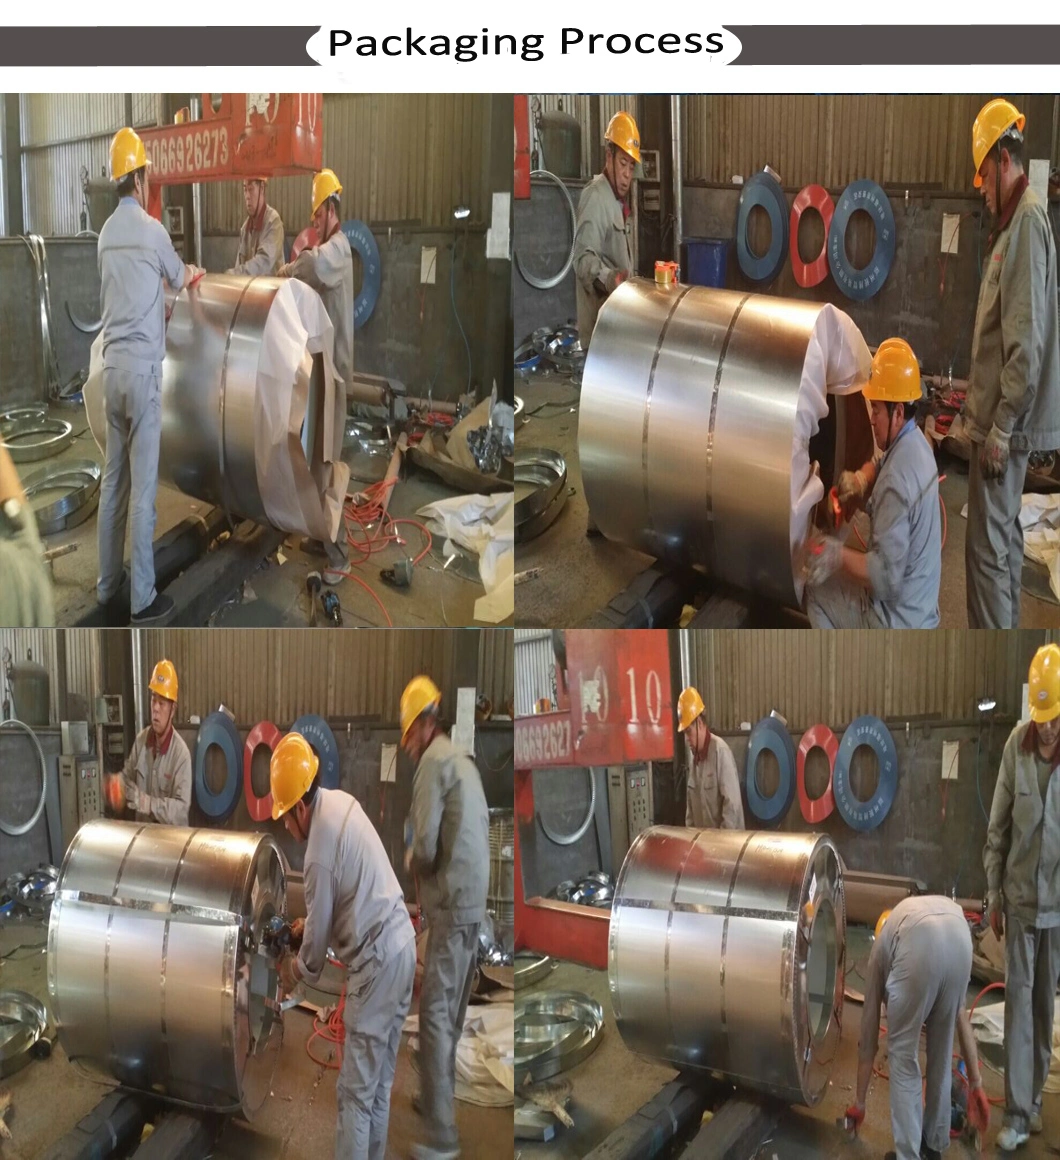 Prime Quality PE Coating Color Coated Galvanized Steel Coil